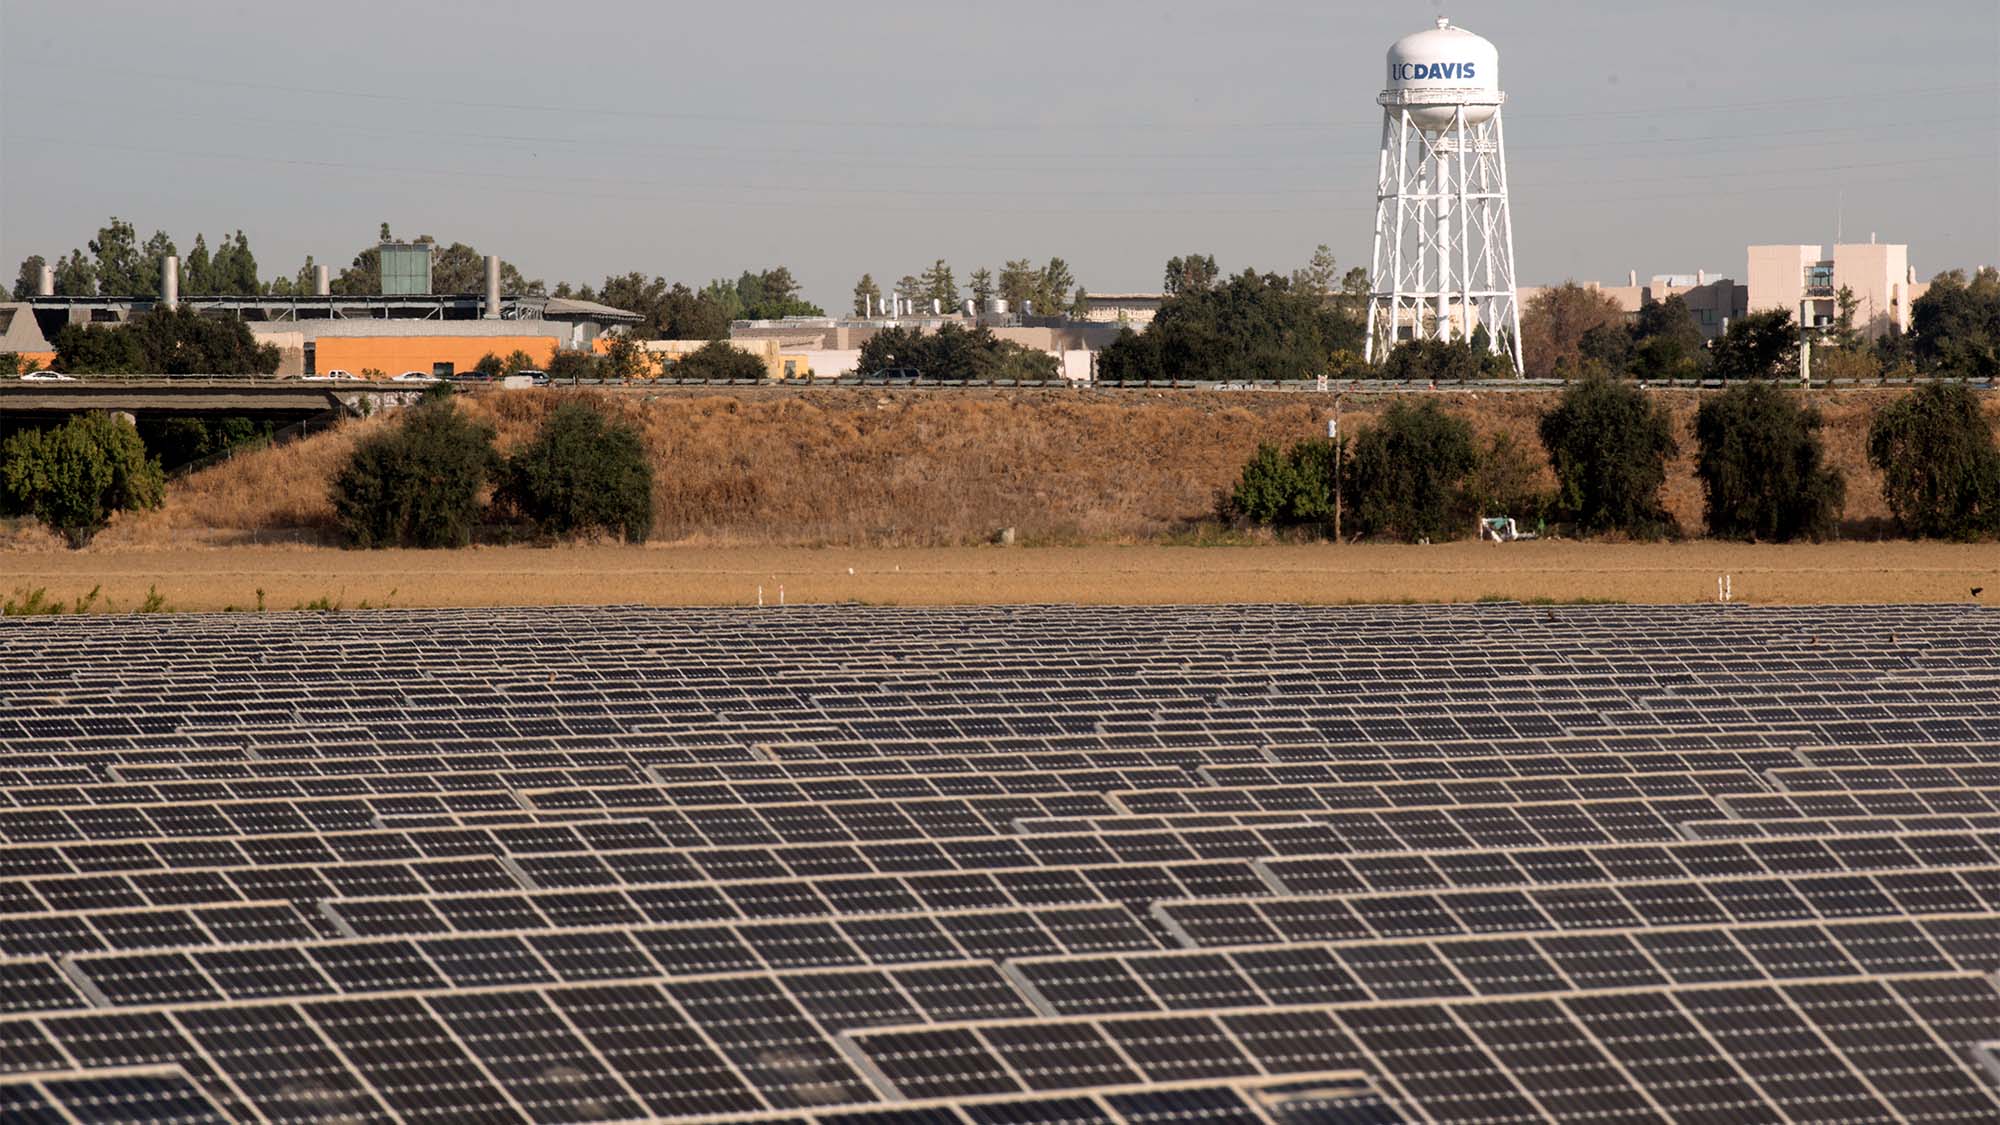 Solar farm with UC Davis water tower in background.